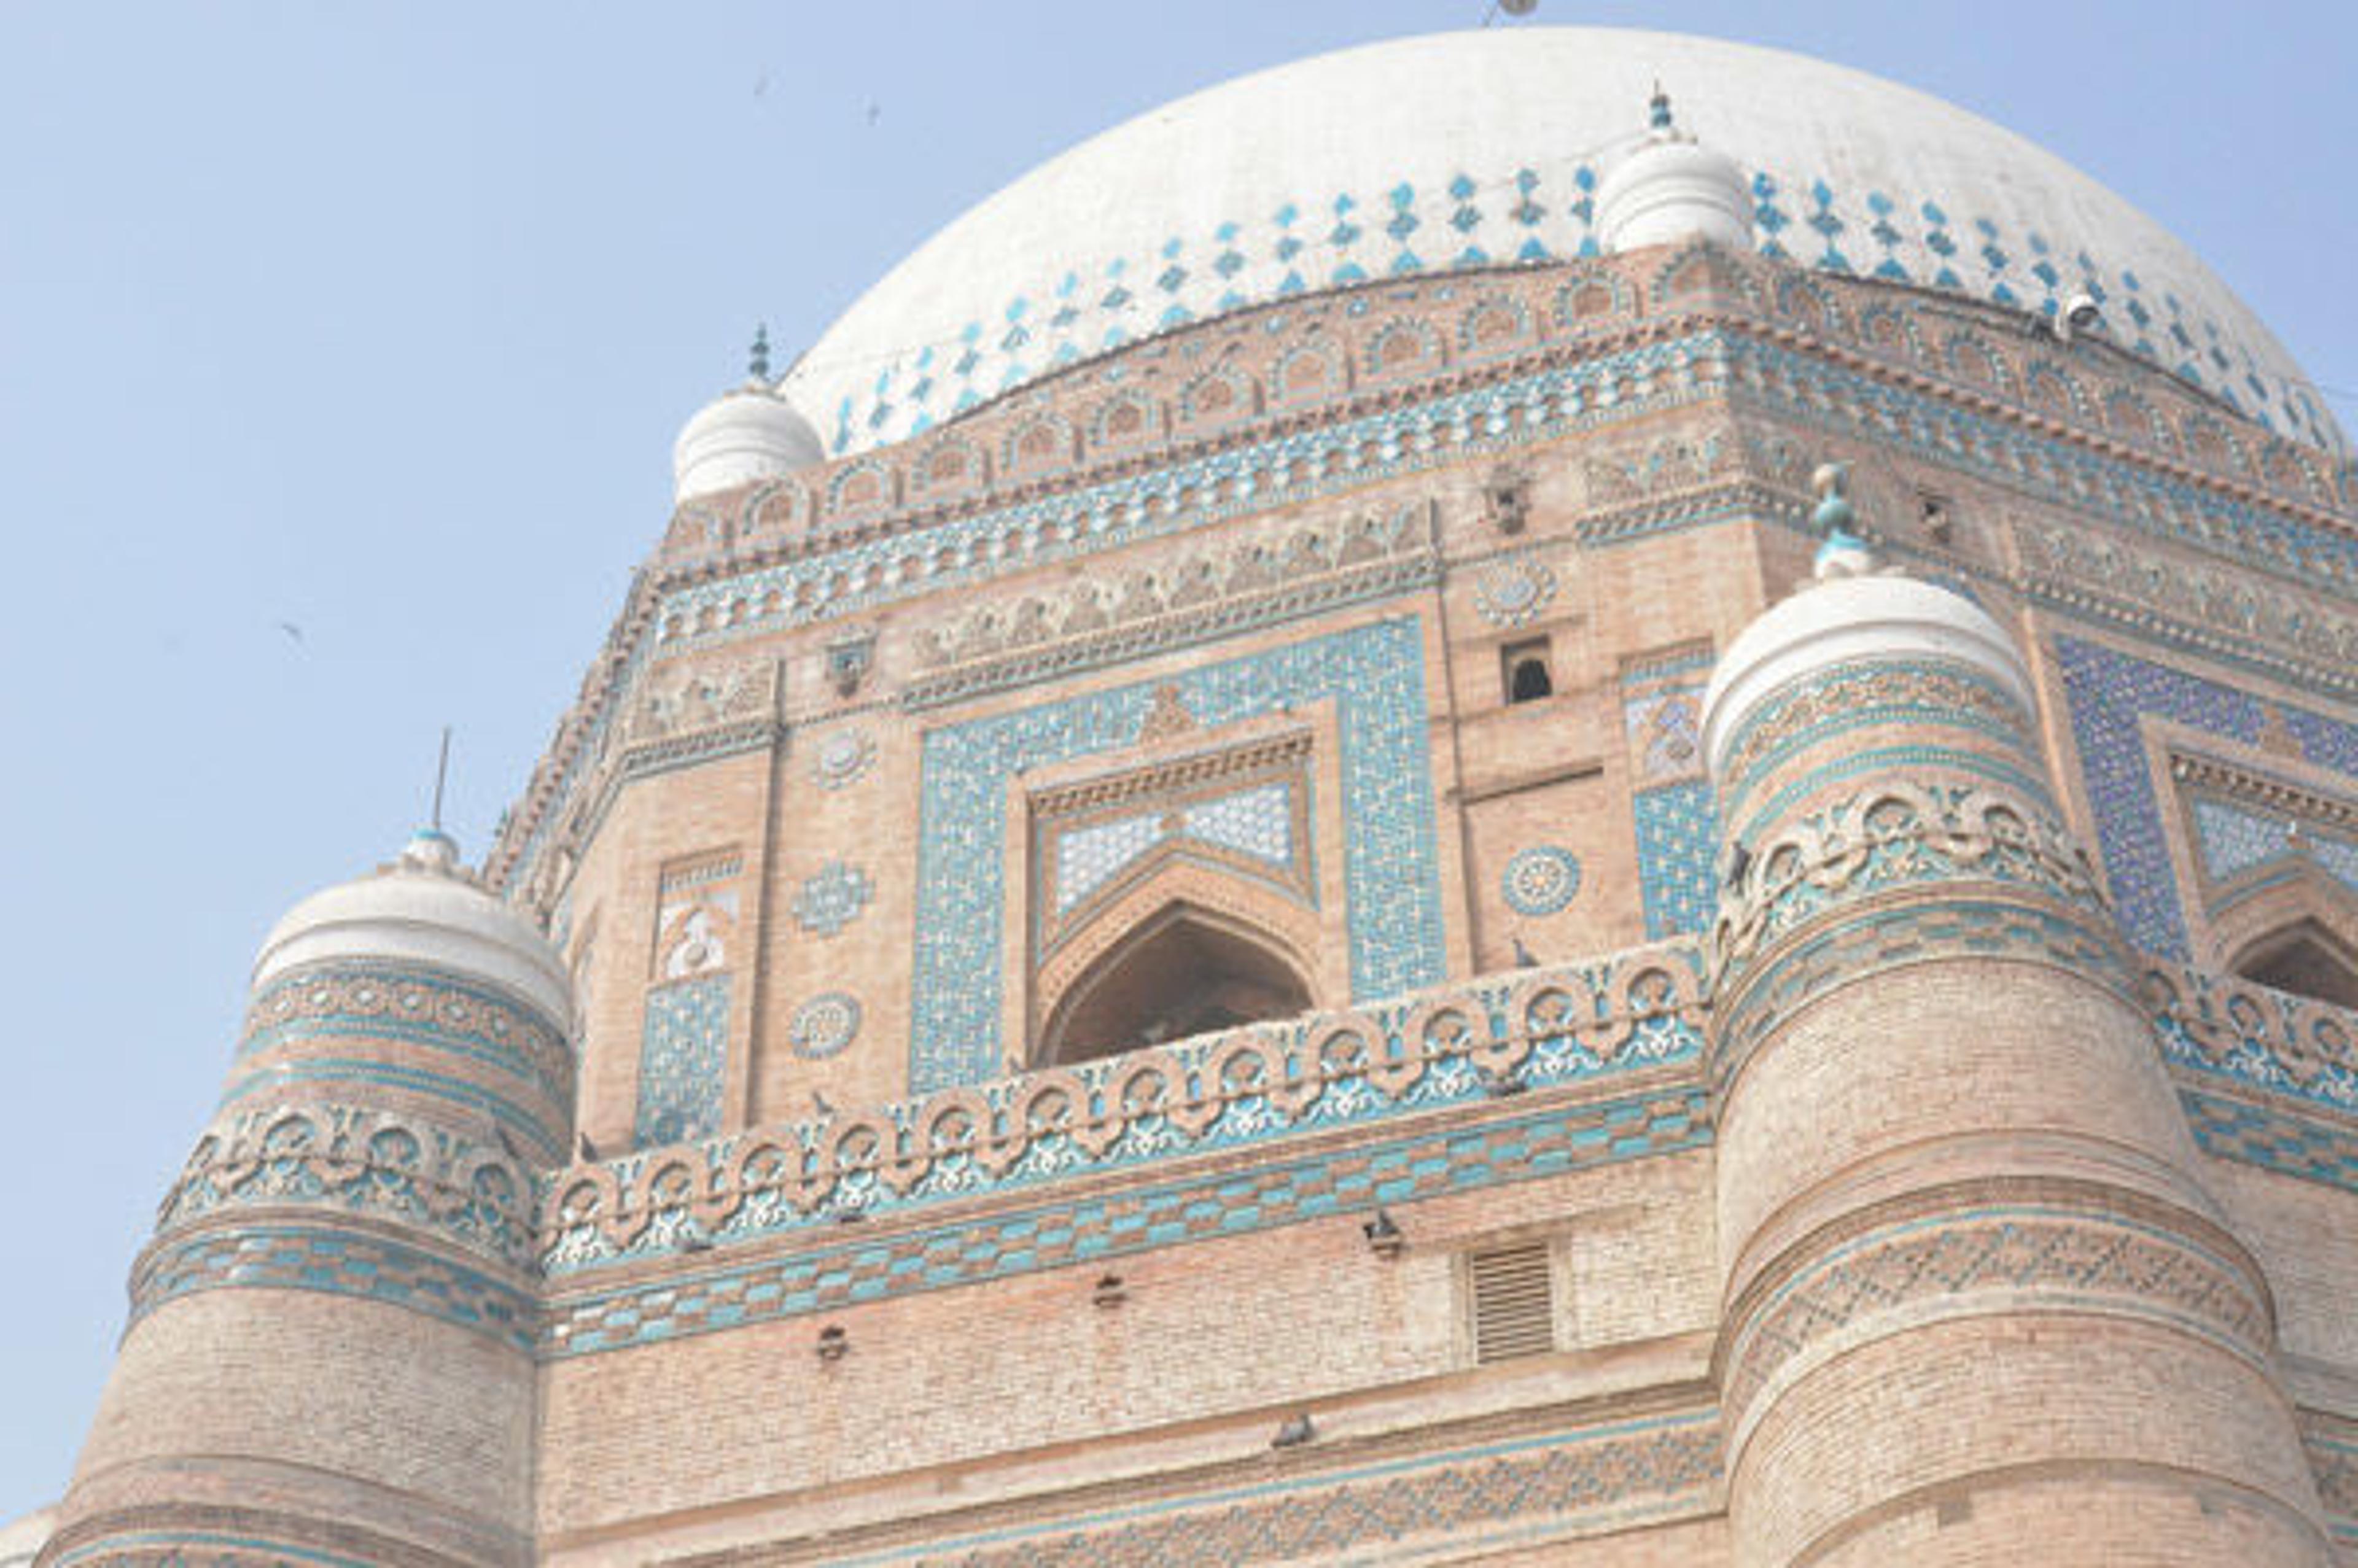 The mausoleum facade at the Tomb of Rukn-e-Alam. Photograph courtesy of the author